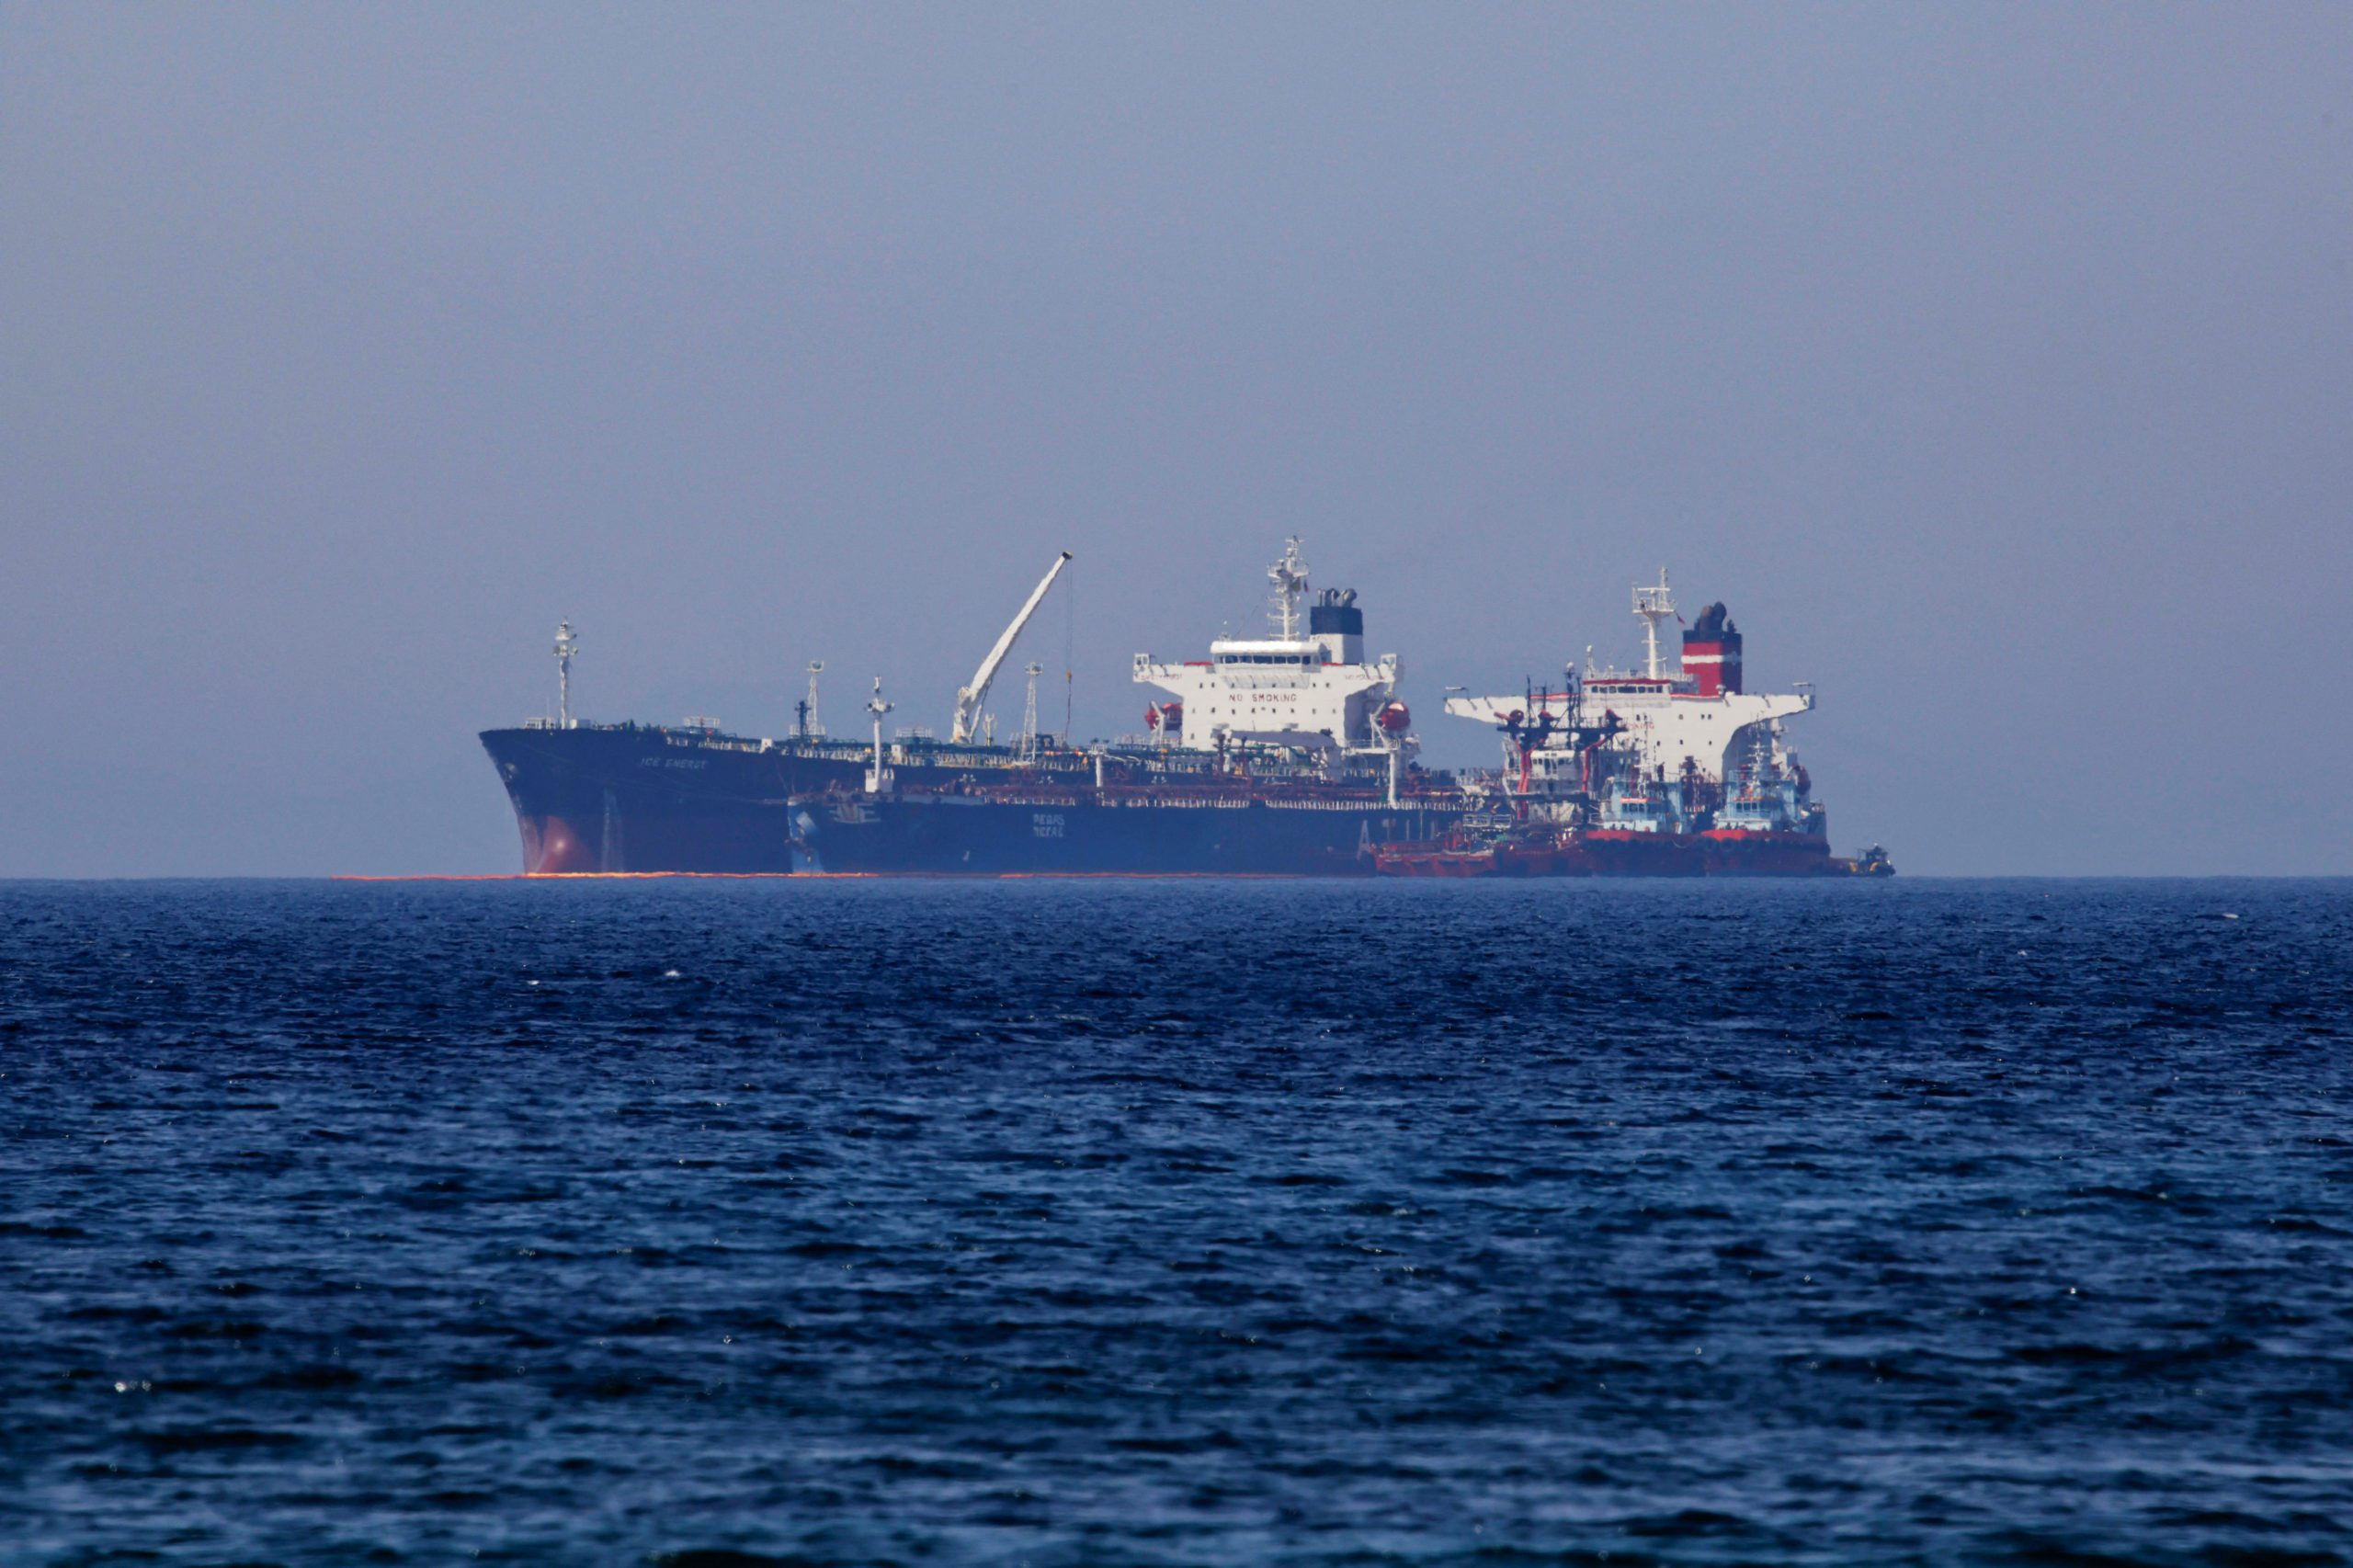 Shipping Industry Calls for Safe Passage of Ships in Persian Gulf After Iran Seizes Tankers